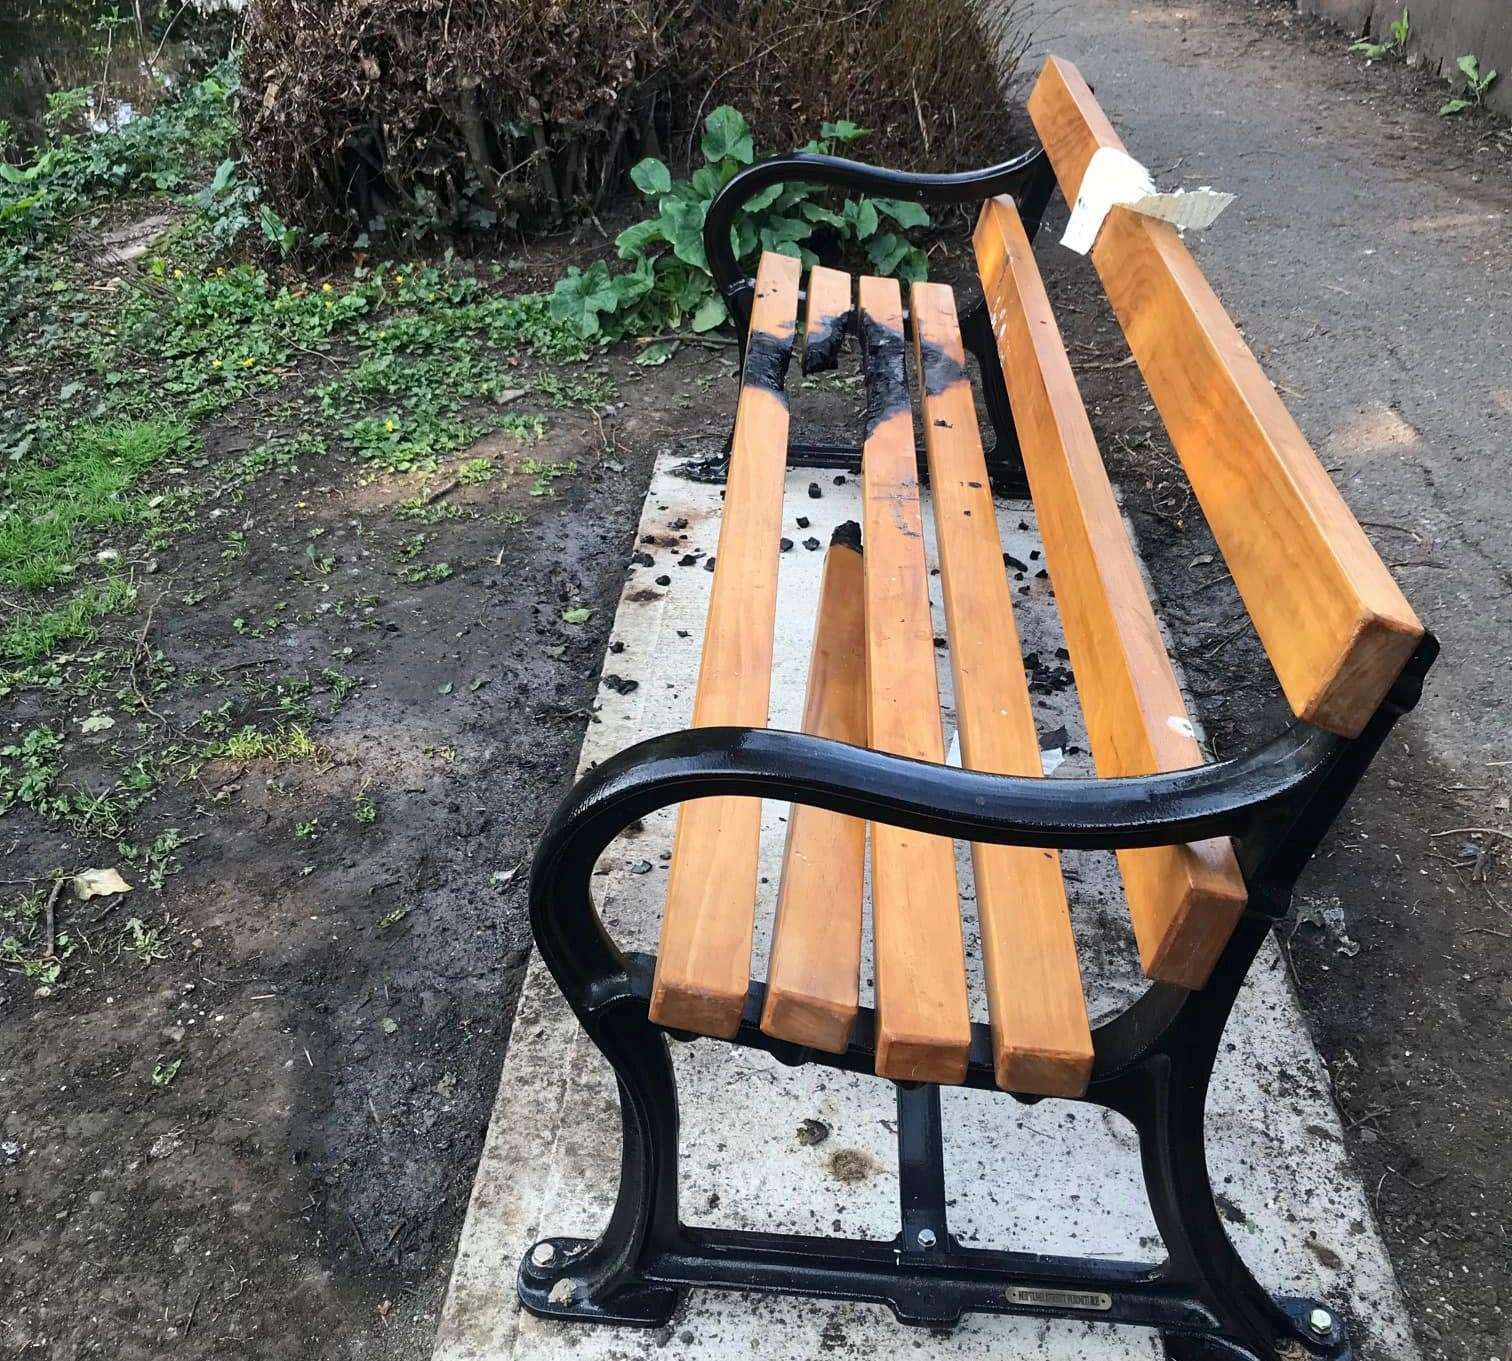 A bench by Westbrook Stream was vandalised in 2022. Picture: Faversham Town Council